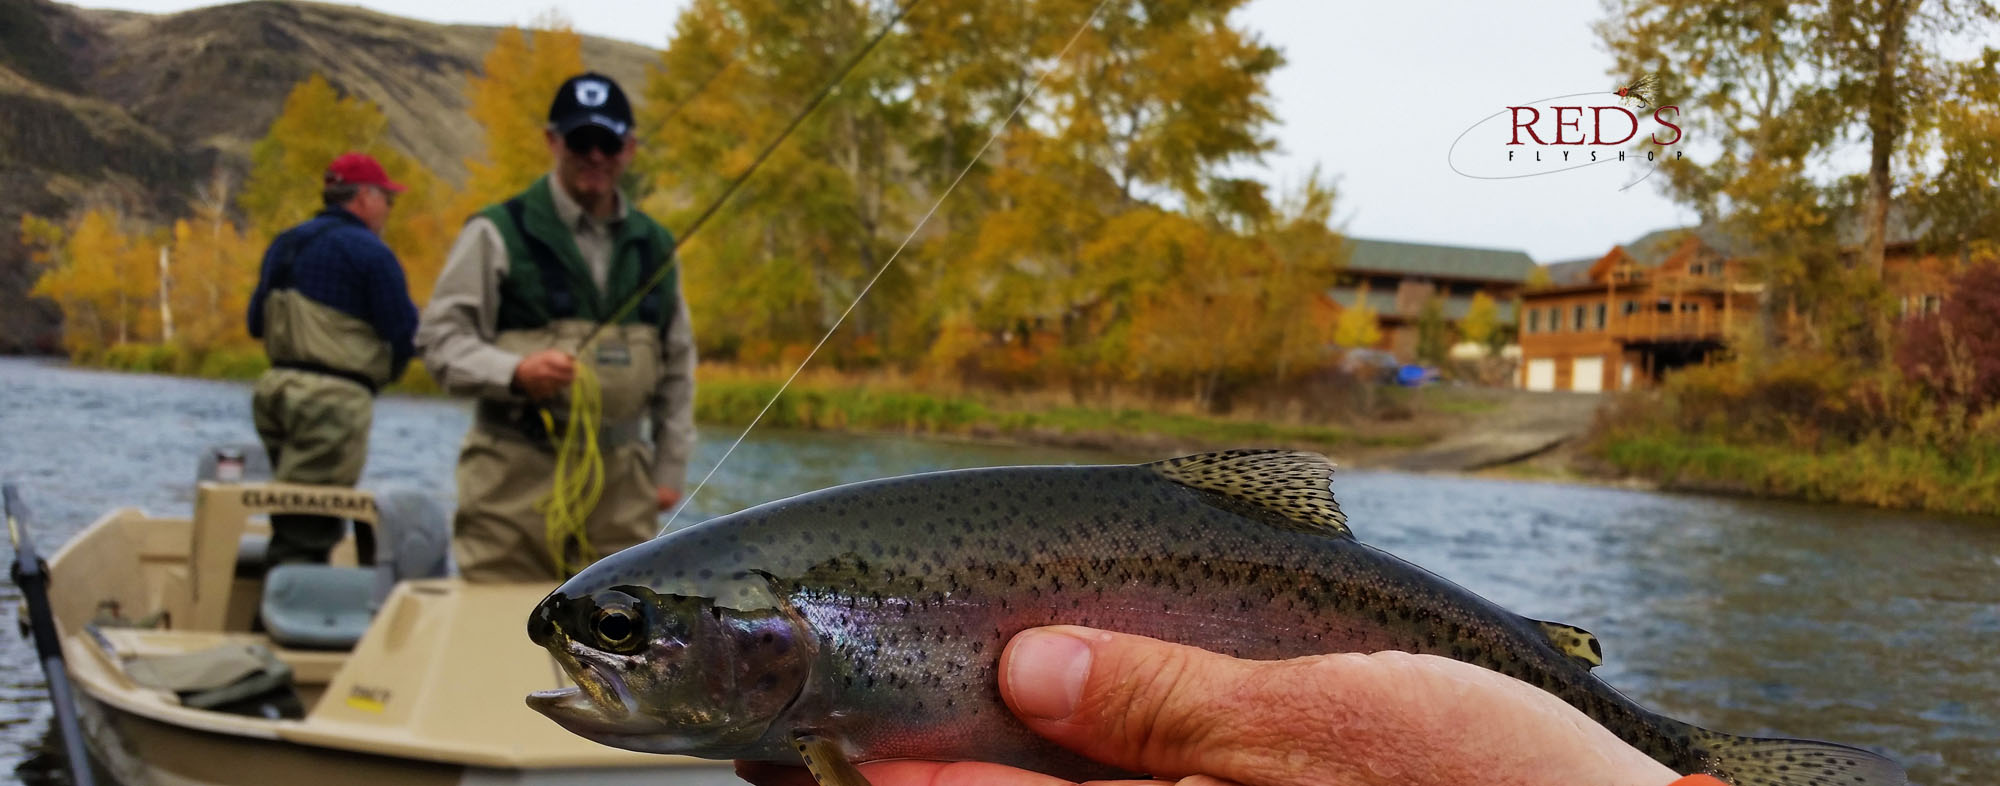 Catching Fish in Front of Canyon River Ranch Lodge